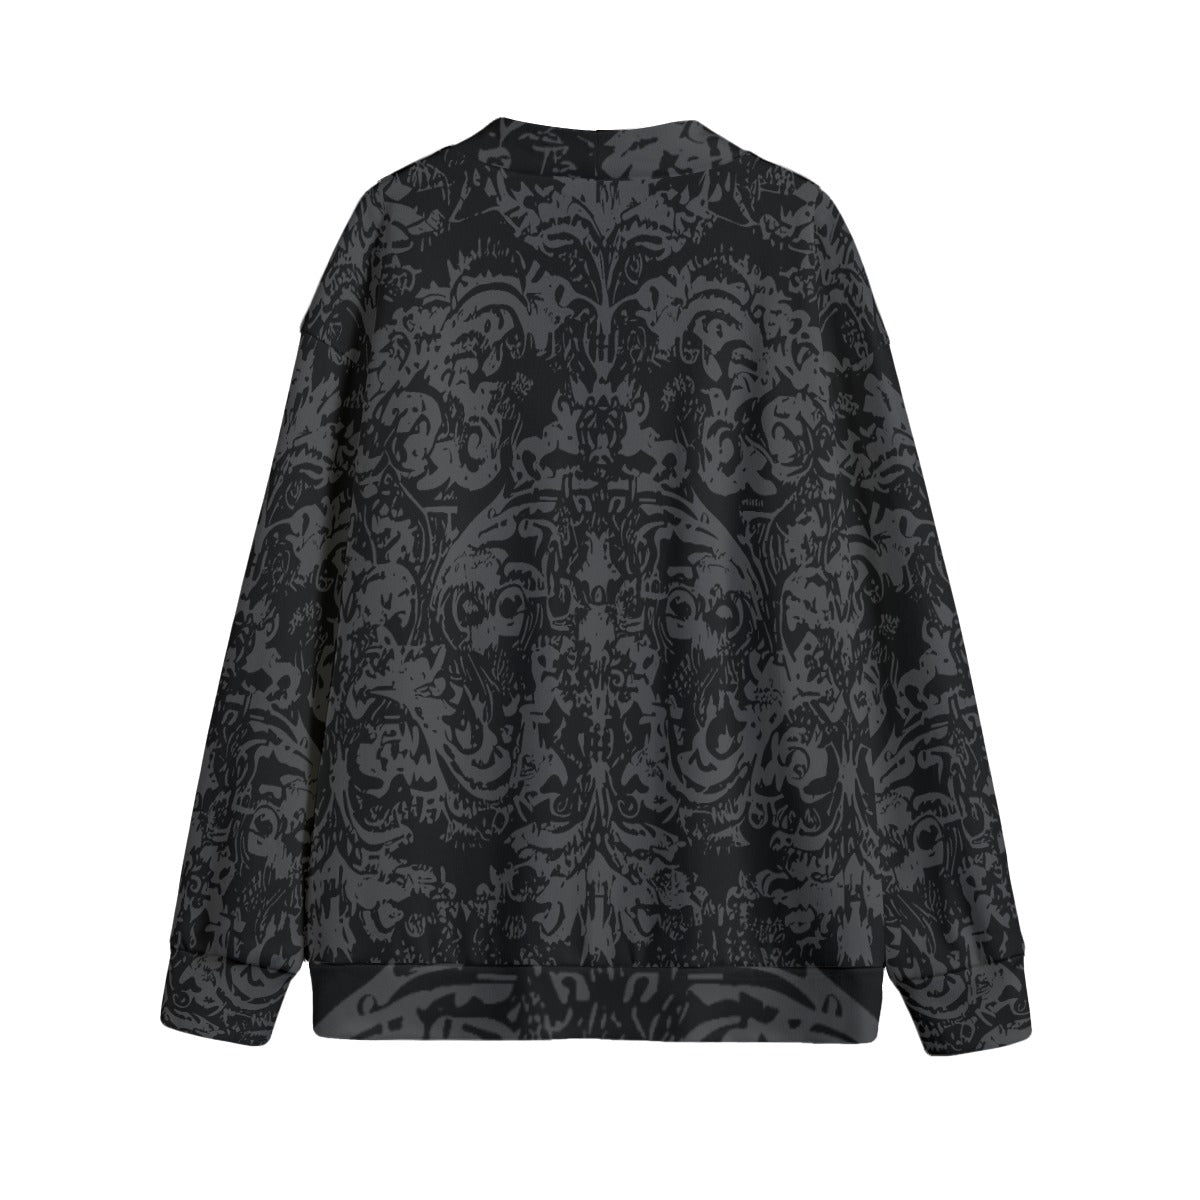 Vampire Art Grunge Damask in Black & Charcoal Unisex V-neck Knitted Fleece Cardigan With Buttons